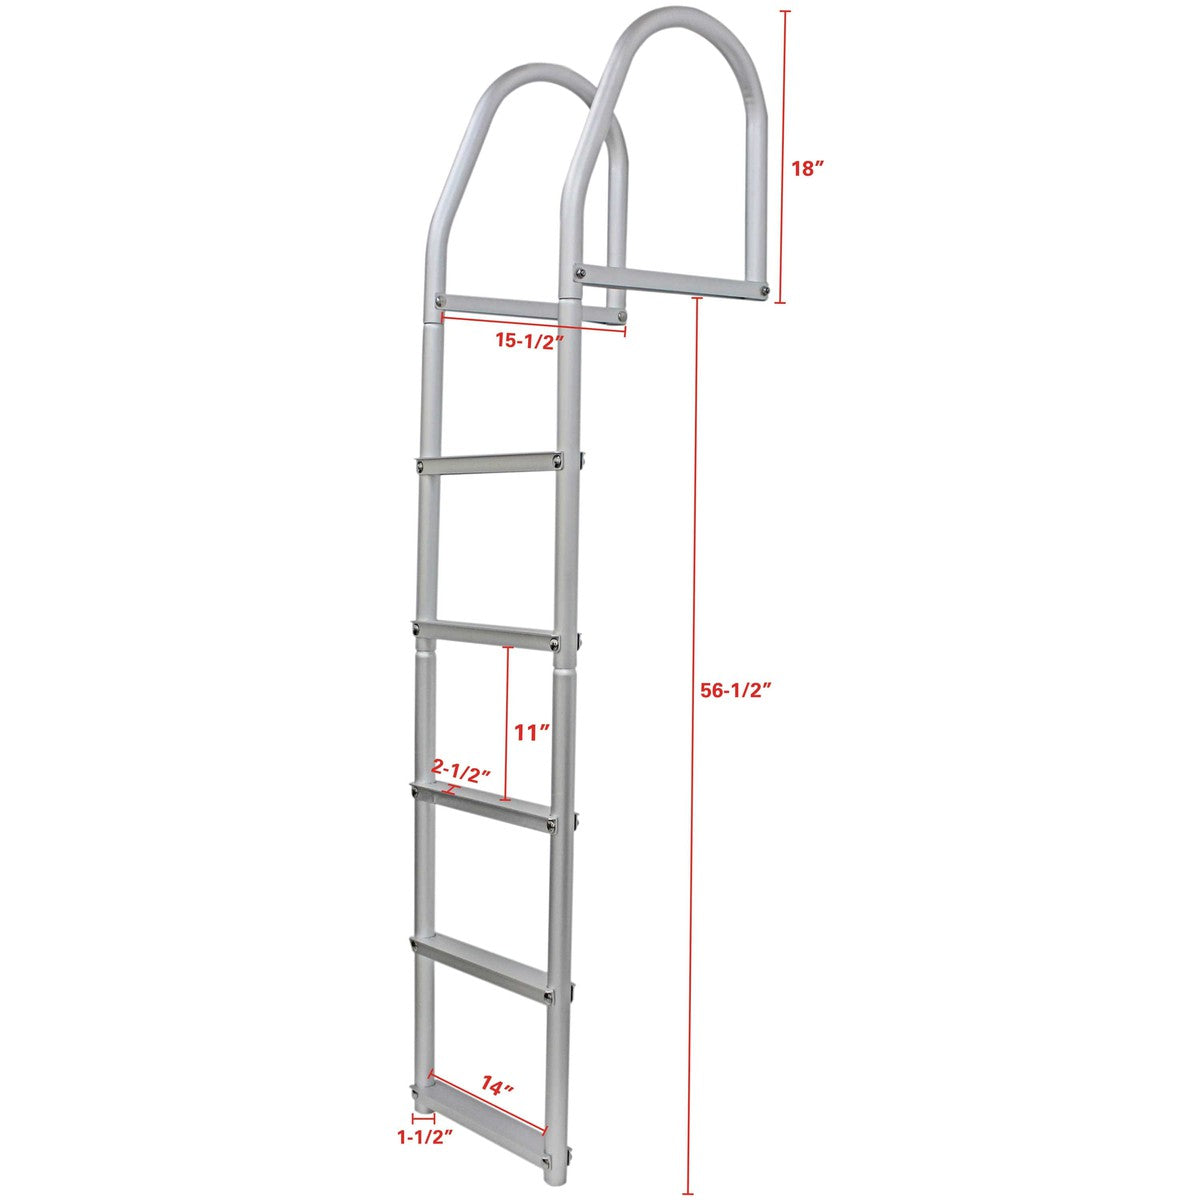 Extreme Max Qualifies for Free Shipping Extreme Max Weld-Free Fixed Dock Ladder 5-Step #3005.4108